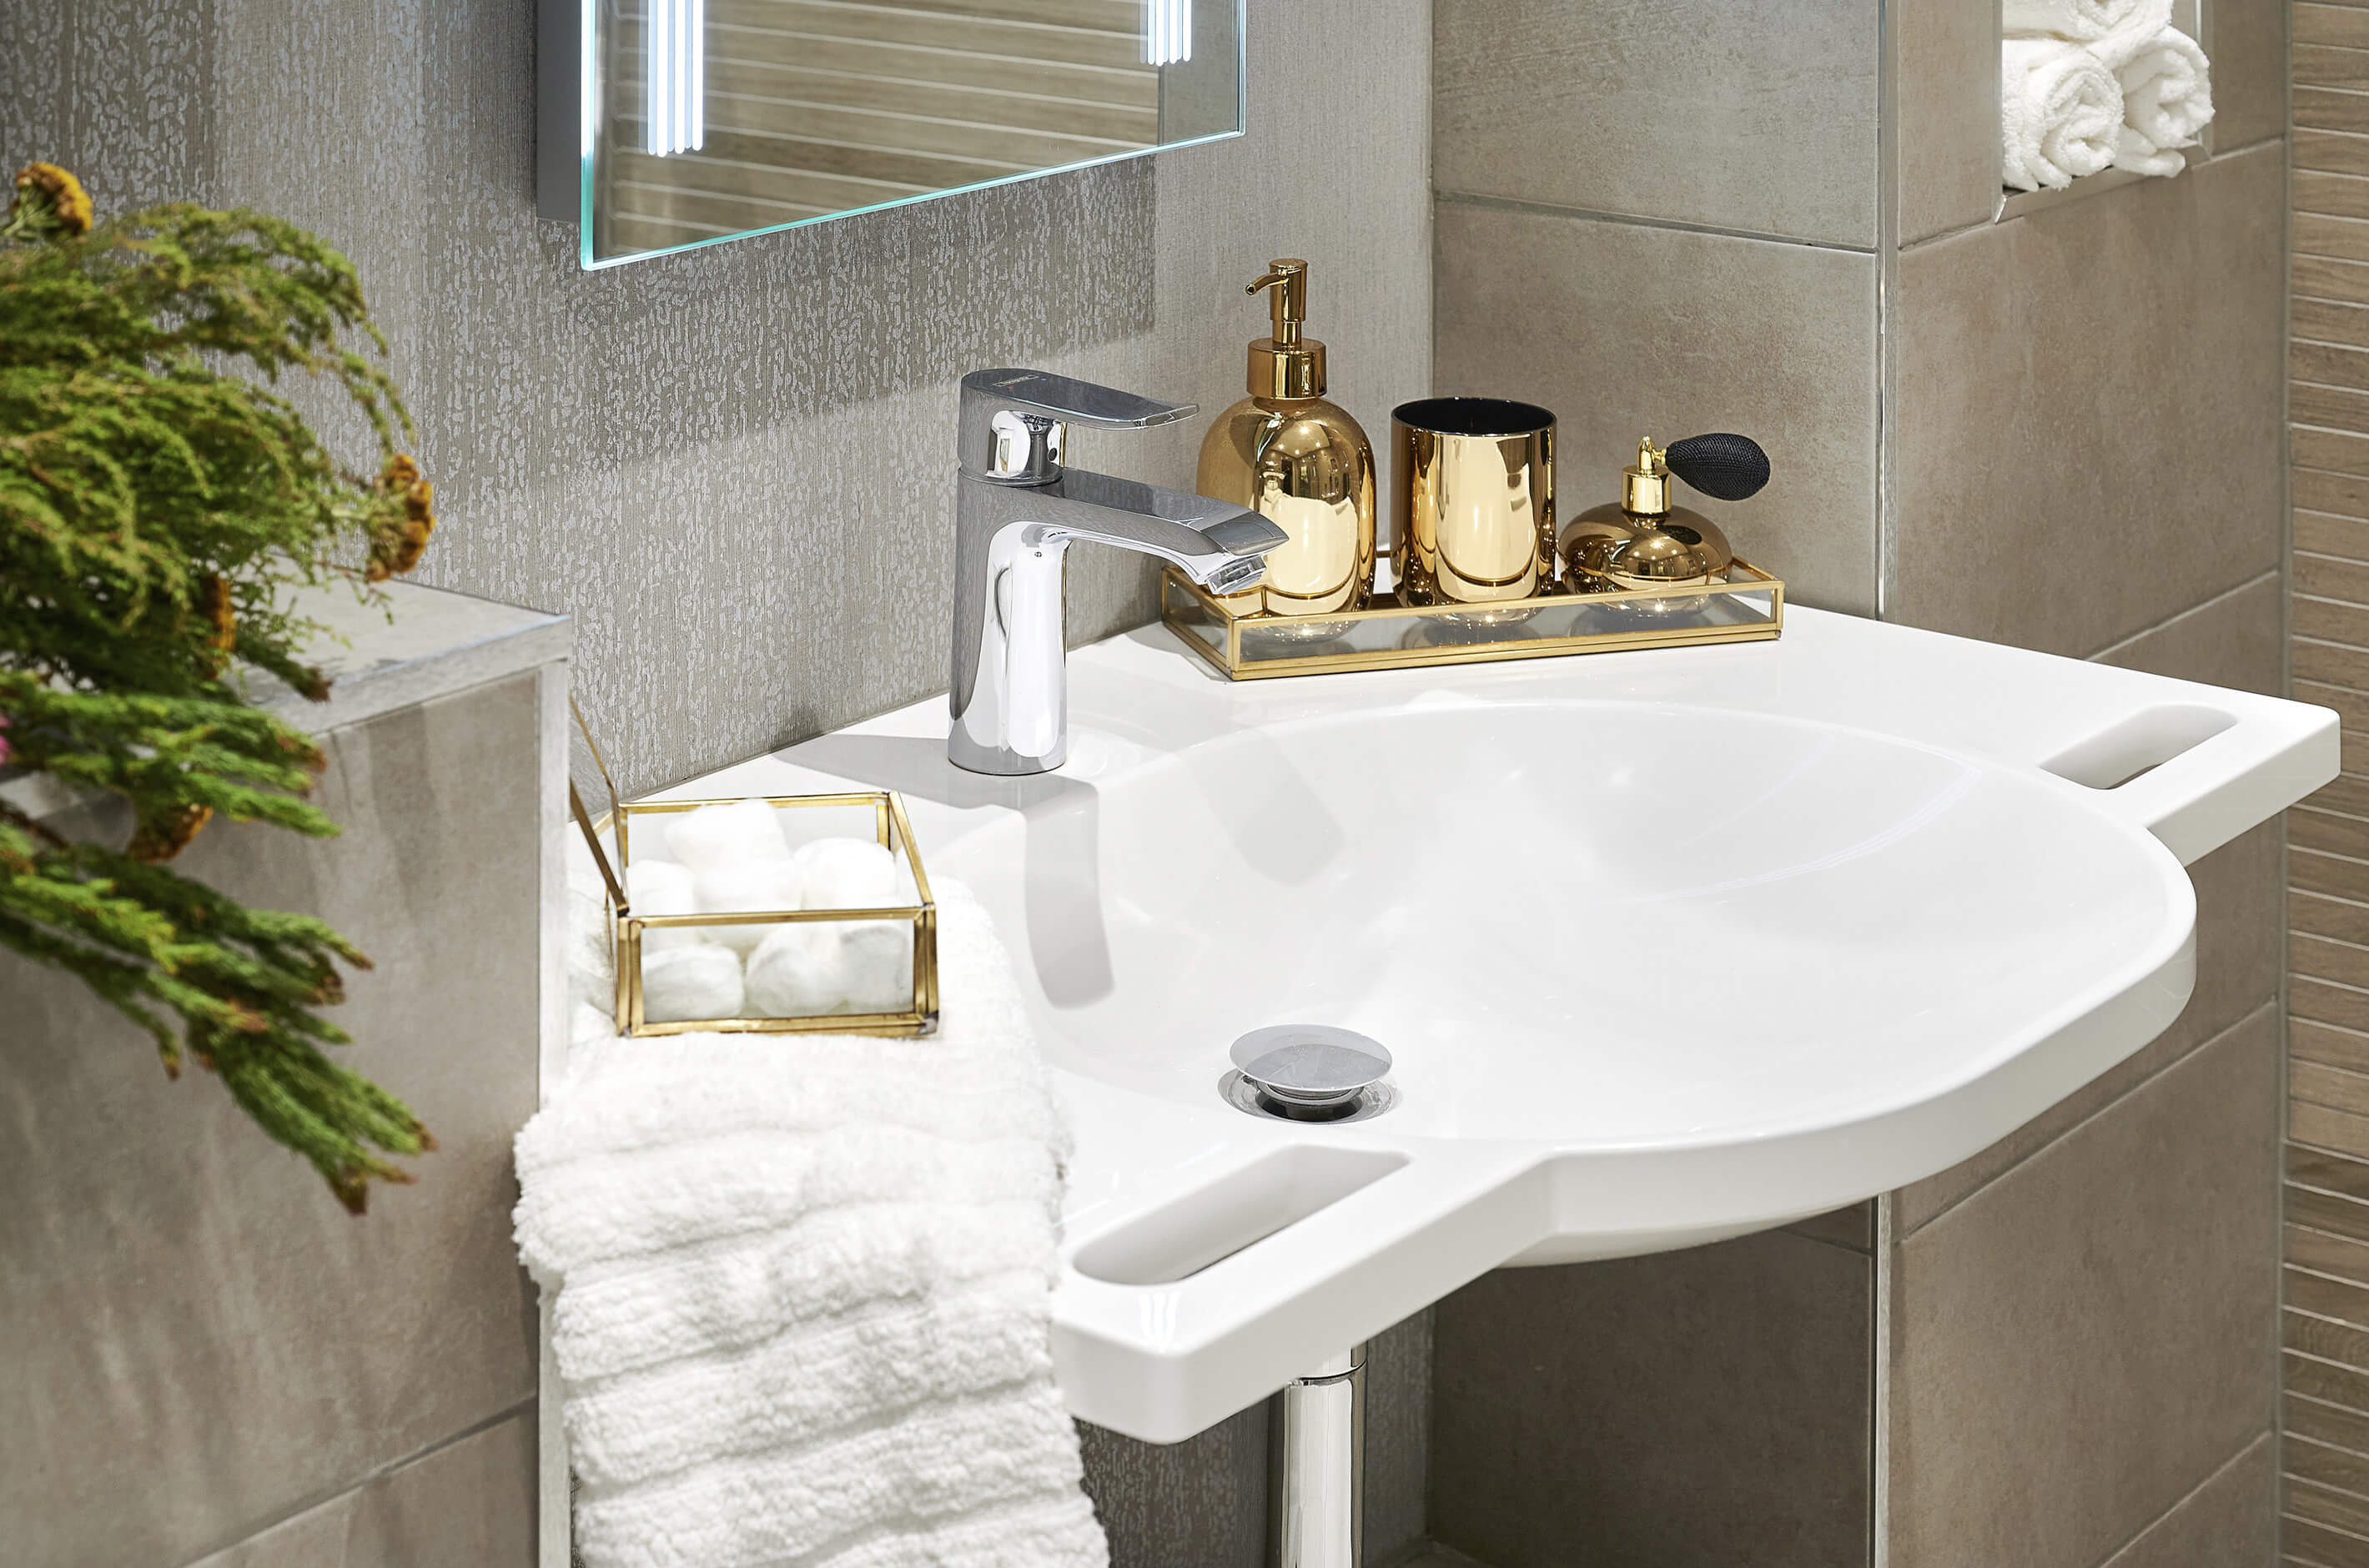 Basin with integrated hand grips with mirror above, with gold accessories and white hand towel in grips.